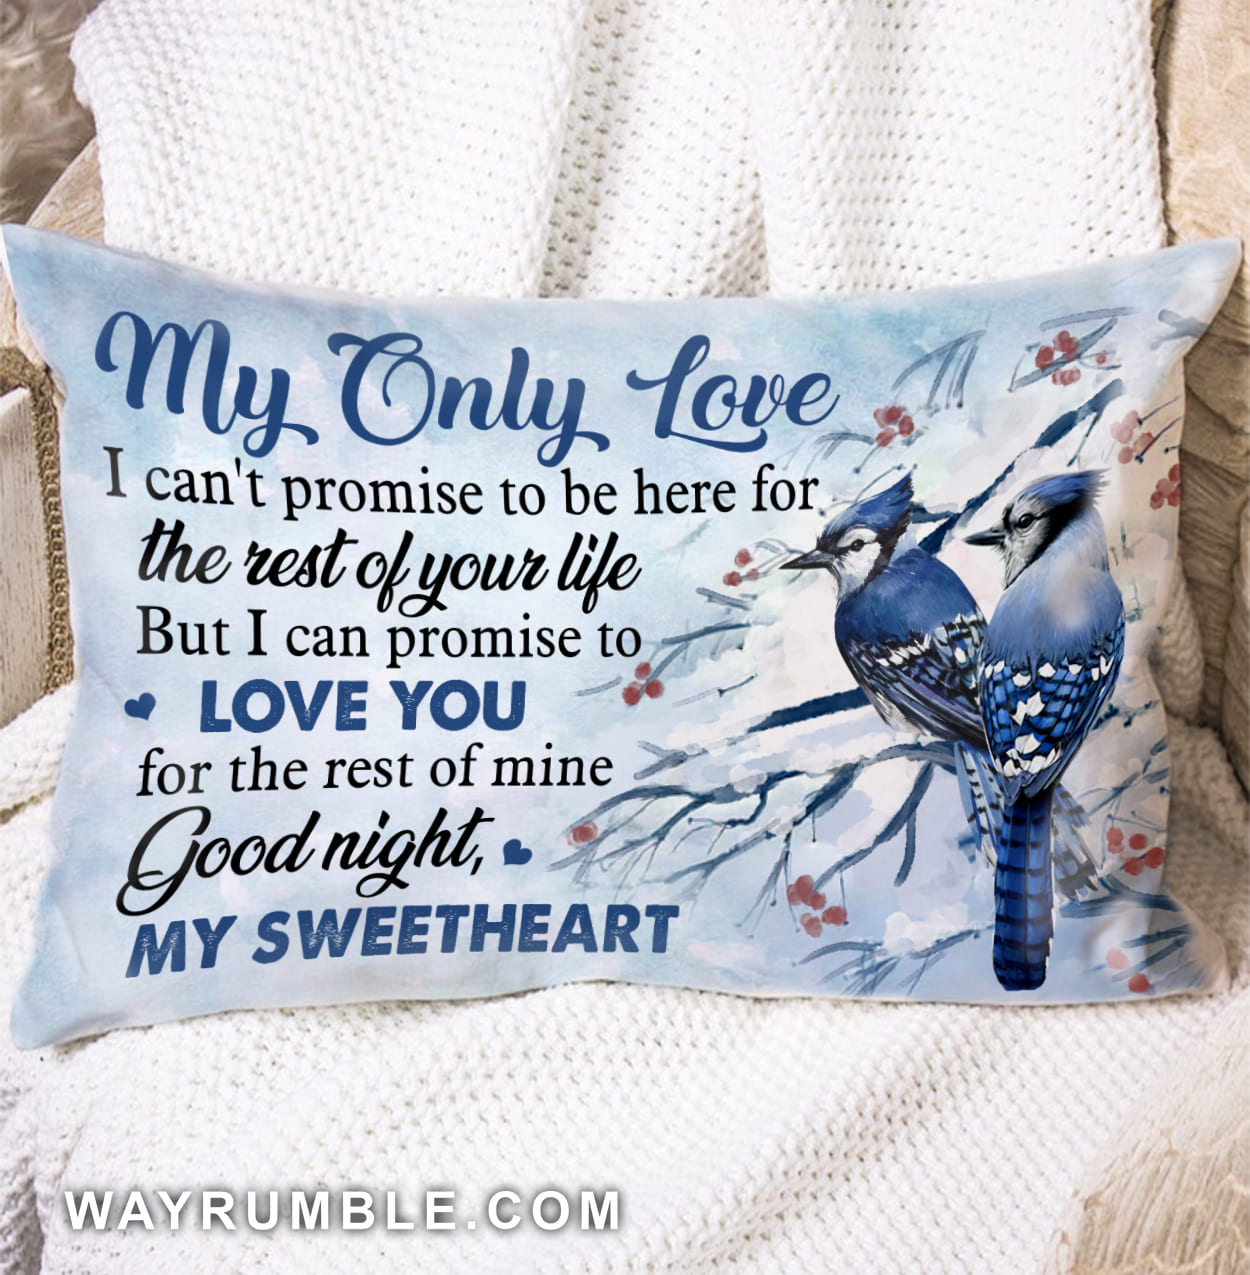 Couple - Blue Jay - I promise to love you for the rest of my life - Pillow